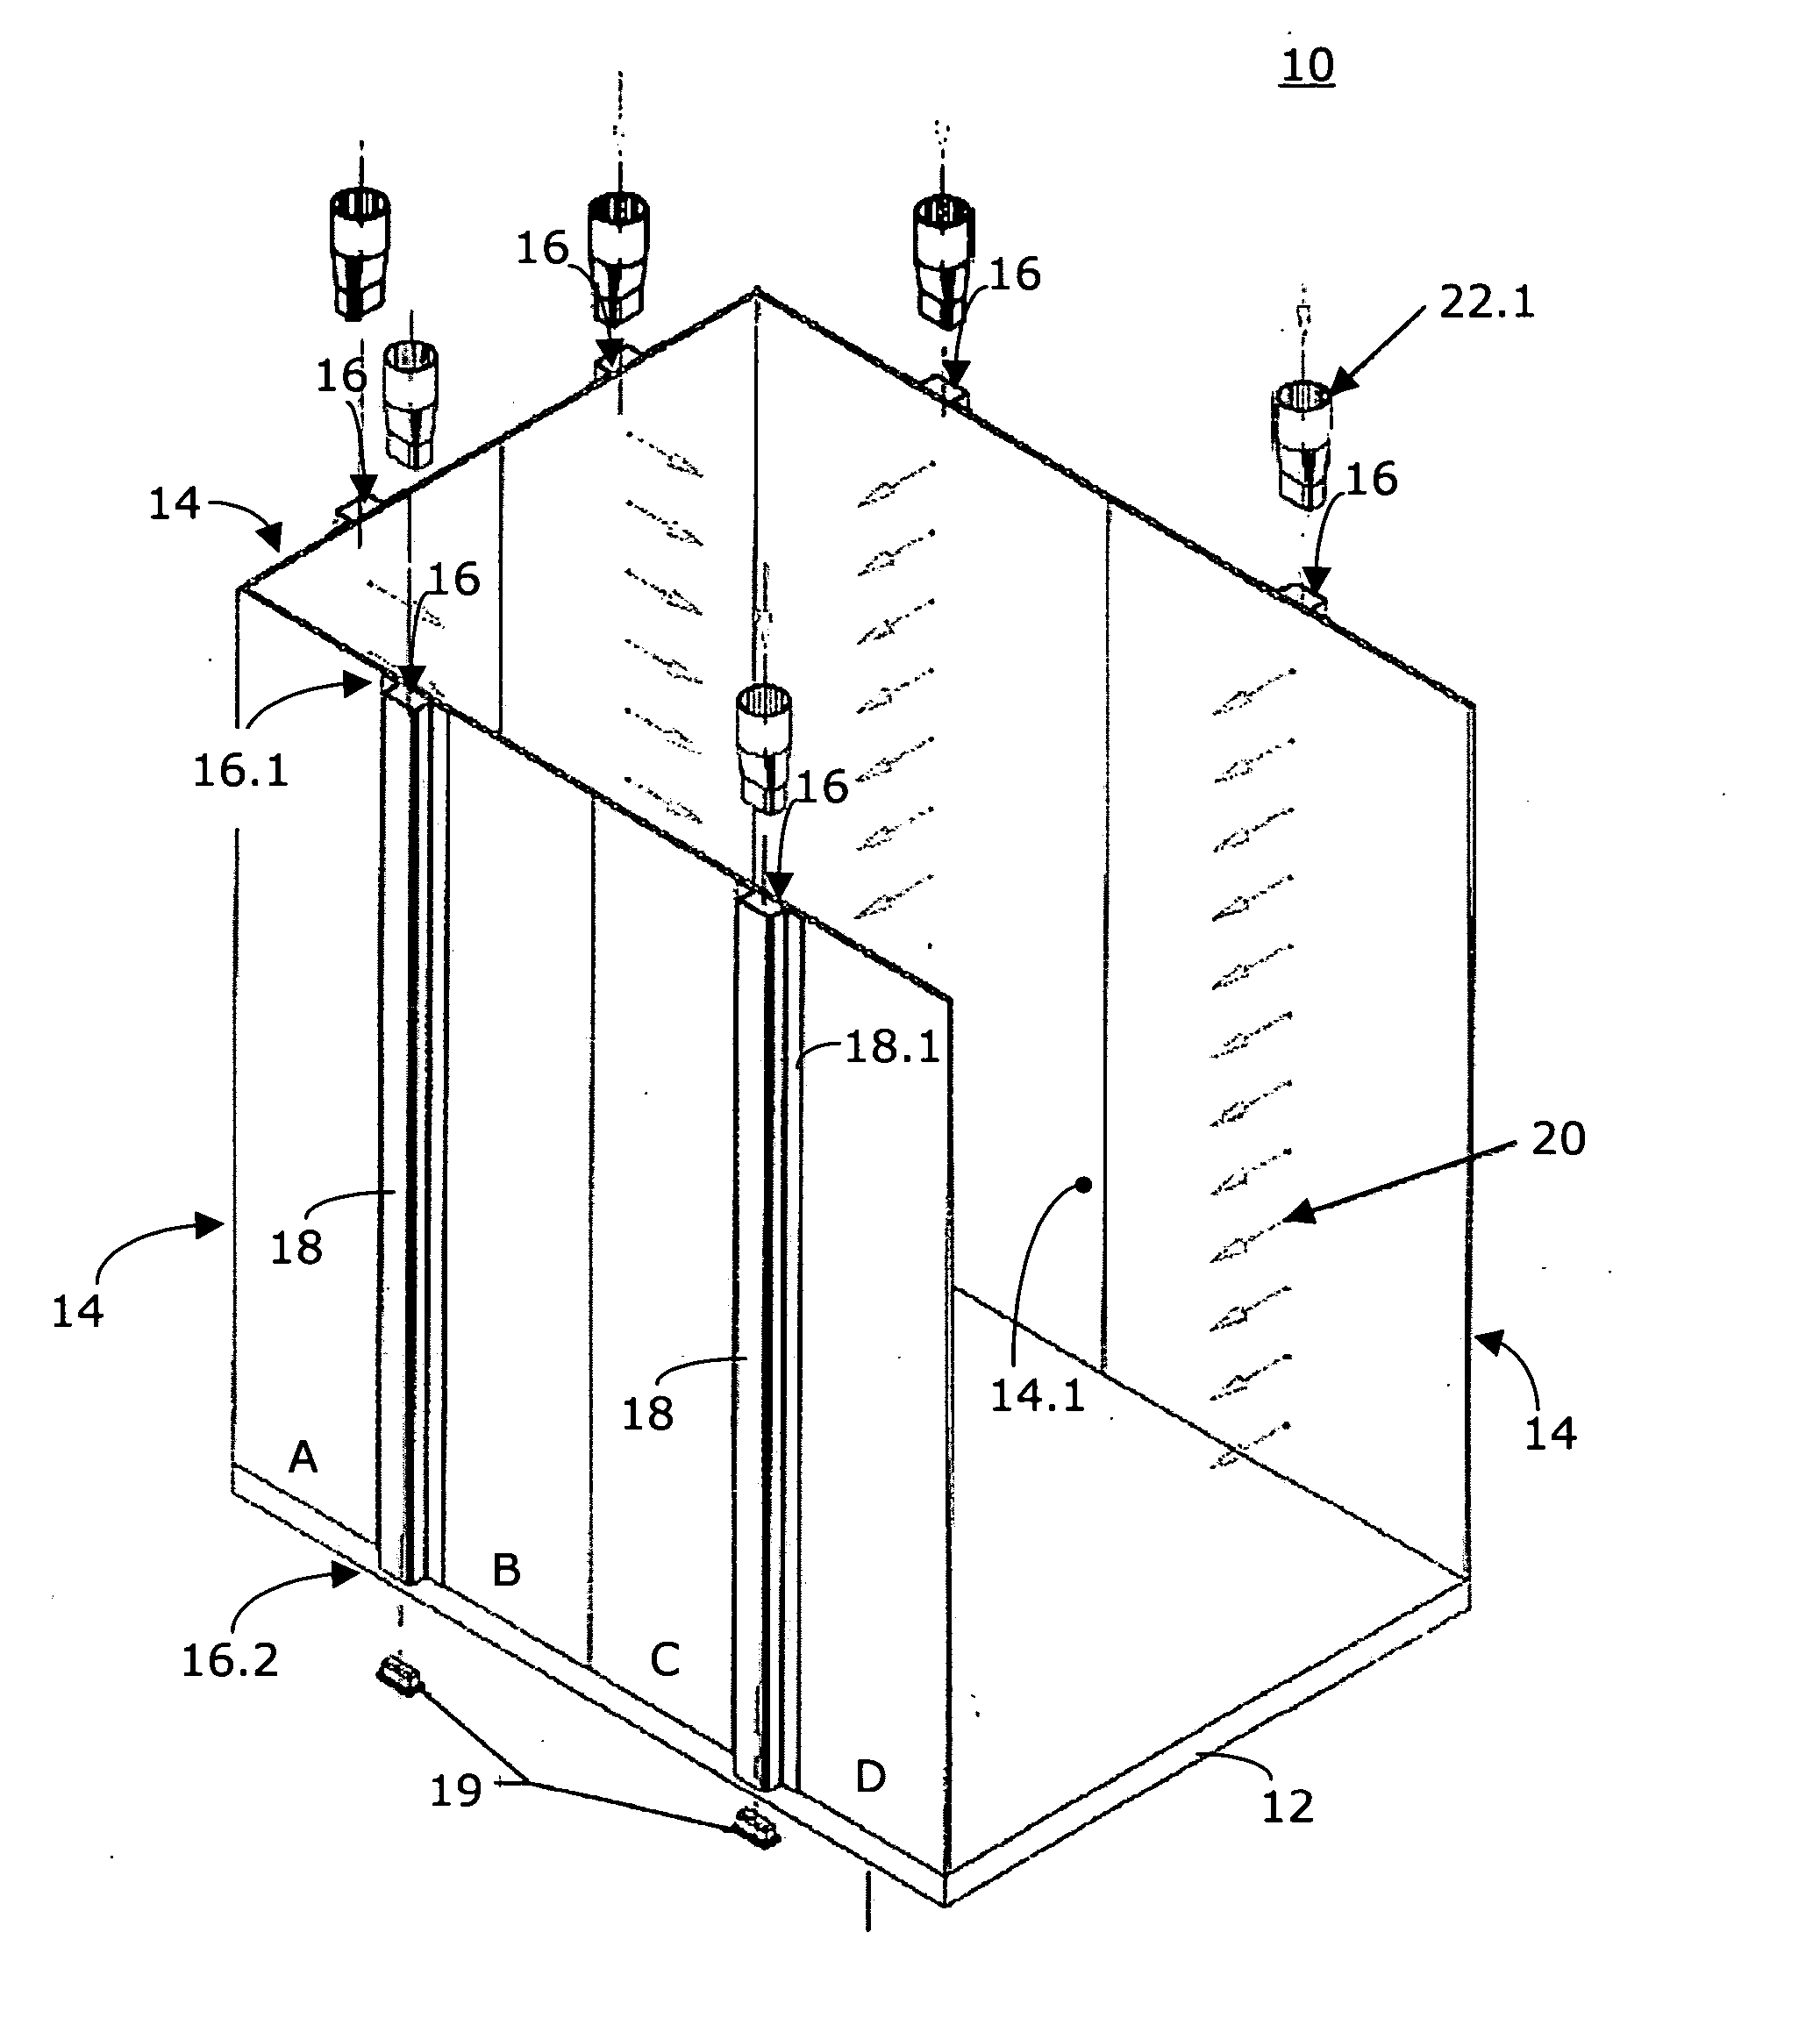 Elevator cabin with integrated ventilation system